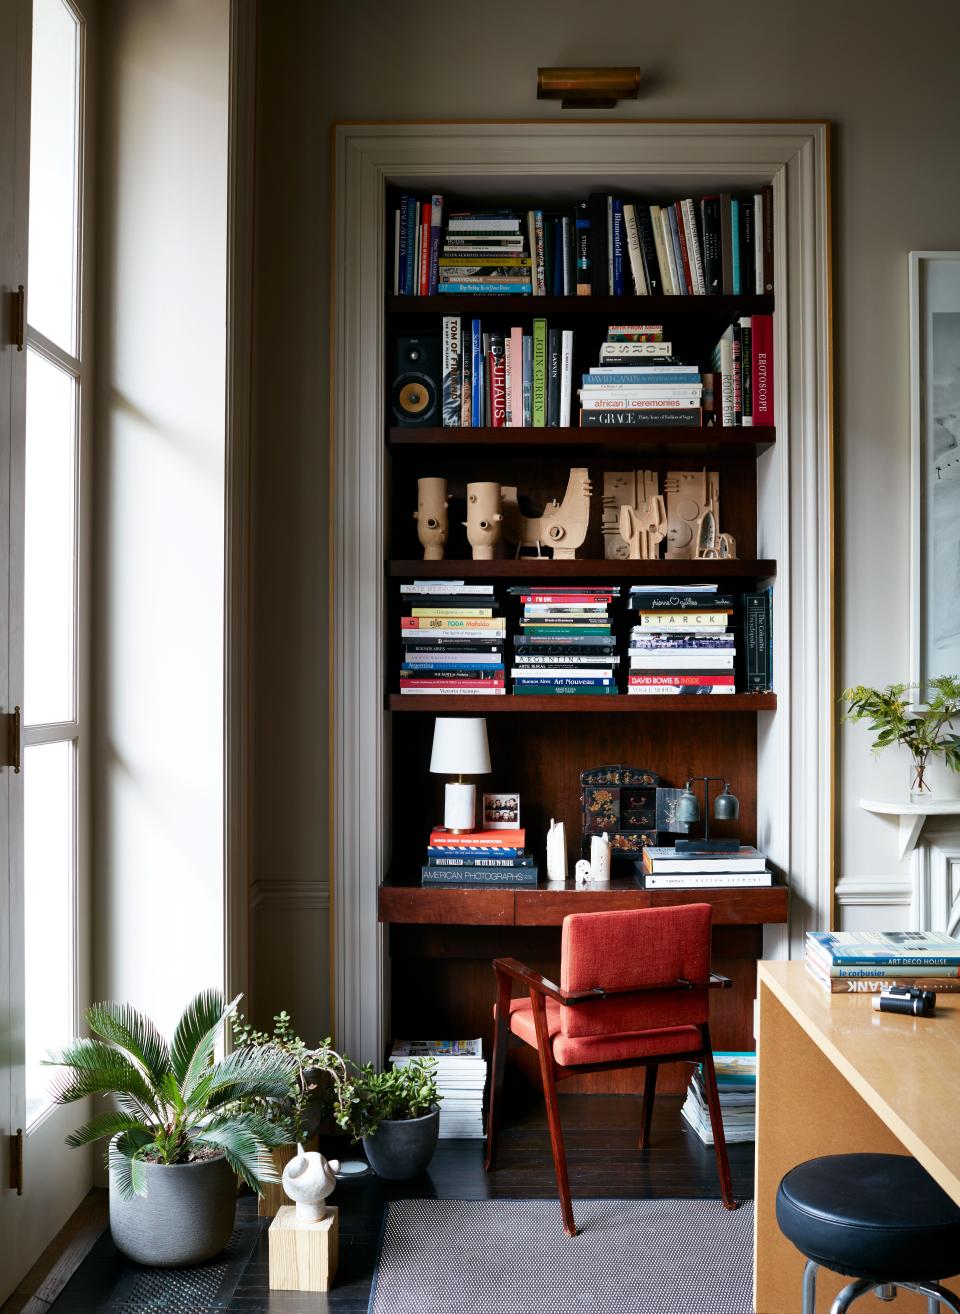 The picture light above the bookcase is a Thomas O'Brien David in brass by Visual Comfort. The study's 1950s rosewood chairs were reupholstered in red-orange linen from Gaston y Daniela at Kravet.